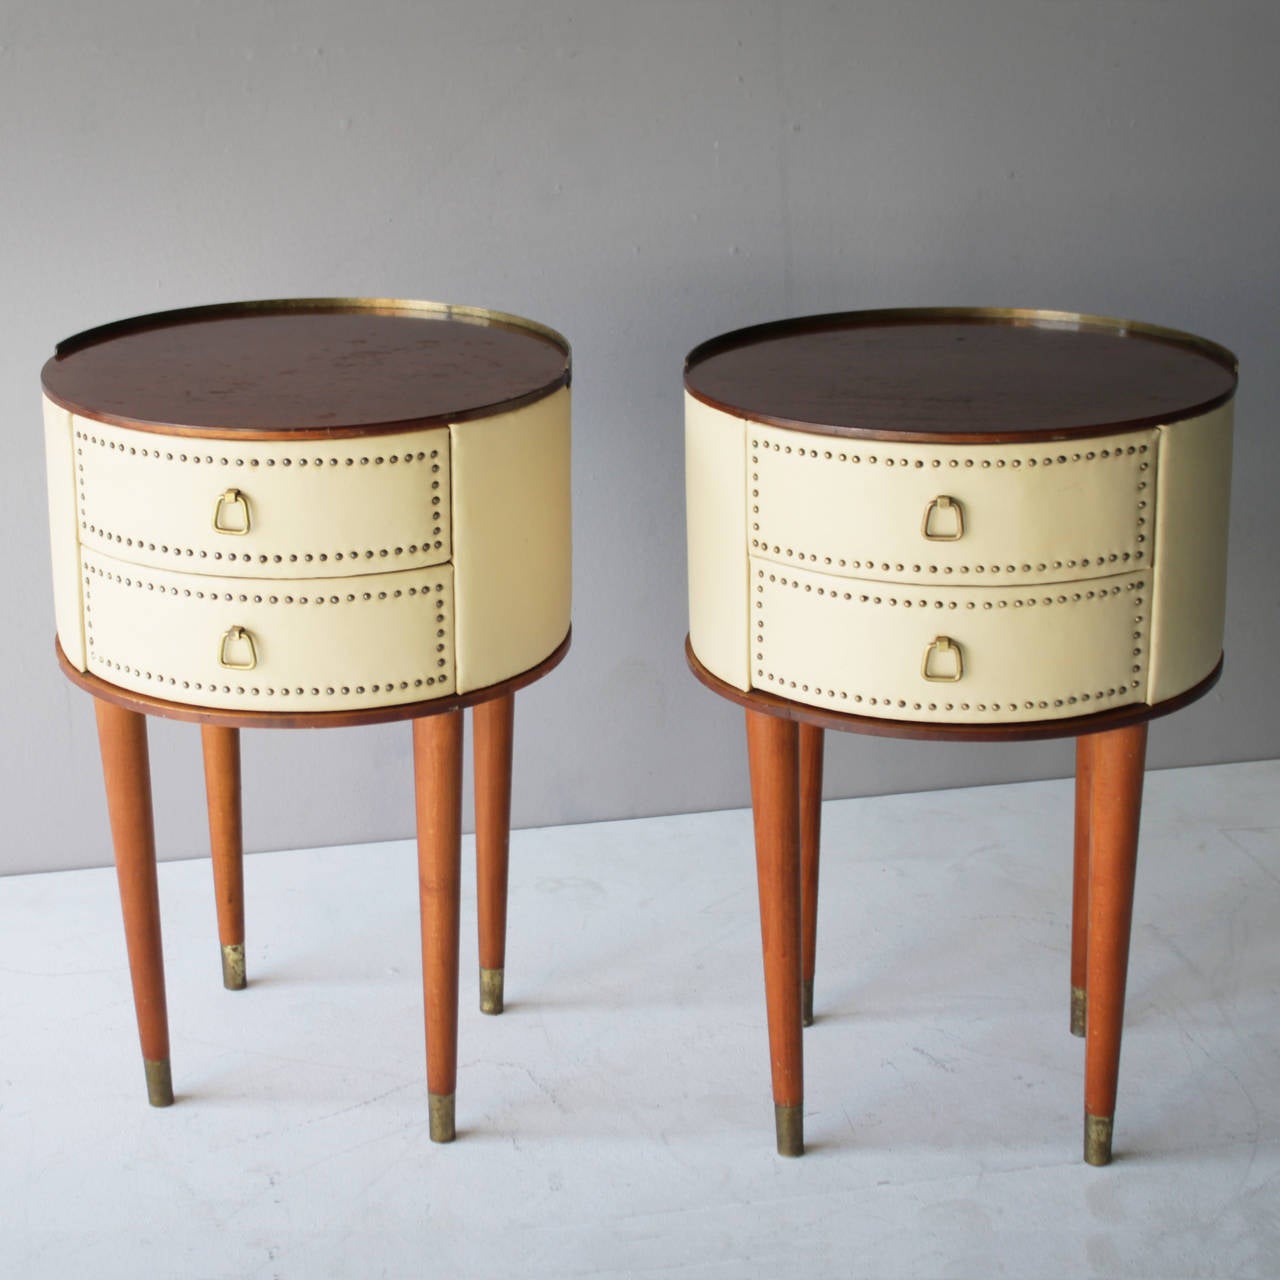 Pair of nightstands by Halvdan Petterson for Tibro, Sweden.
Walnut and cherry with off white faux leather and brass details. Each with two drawers. Labeled.